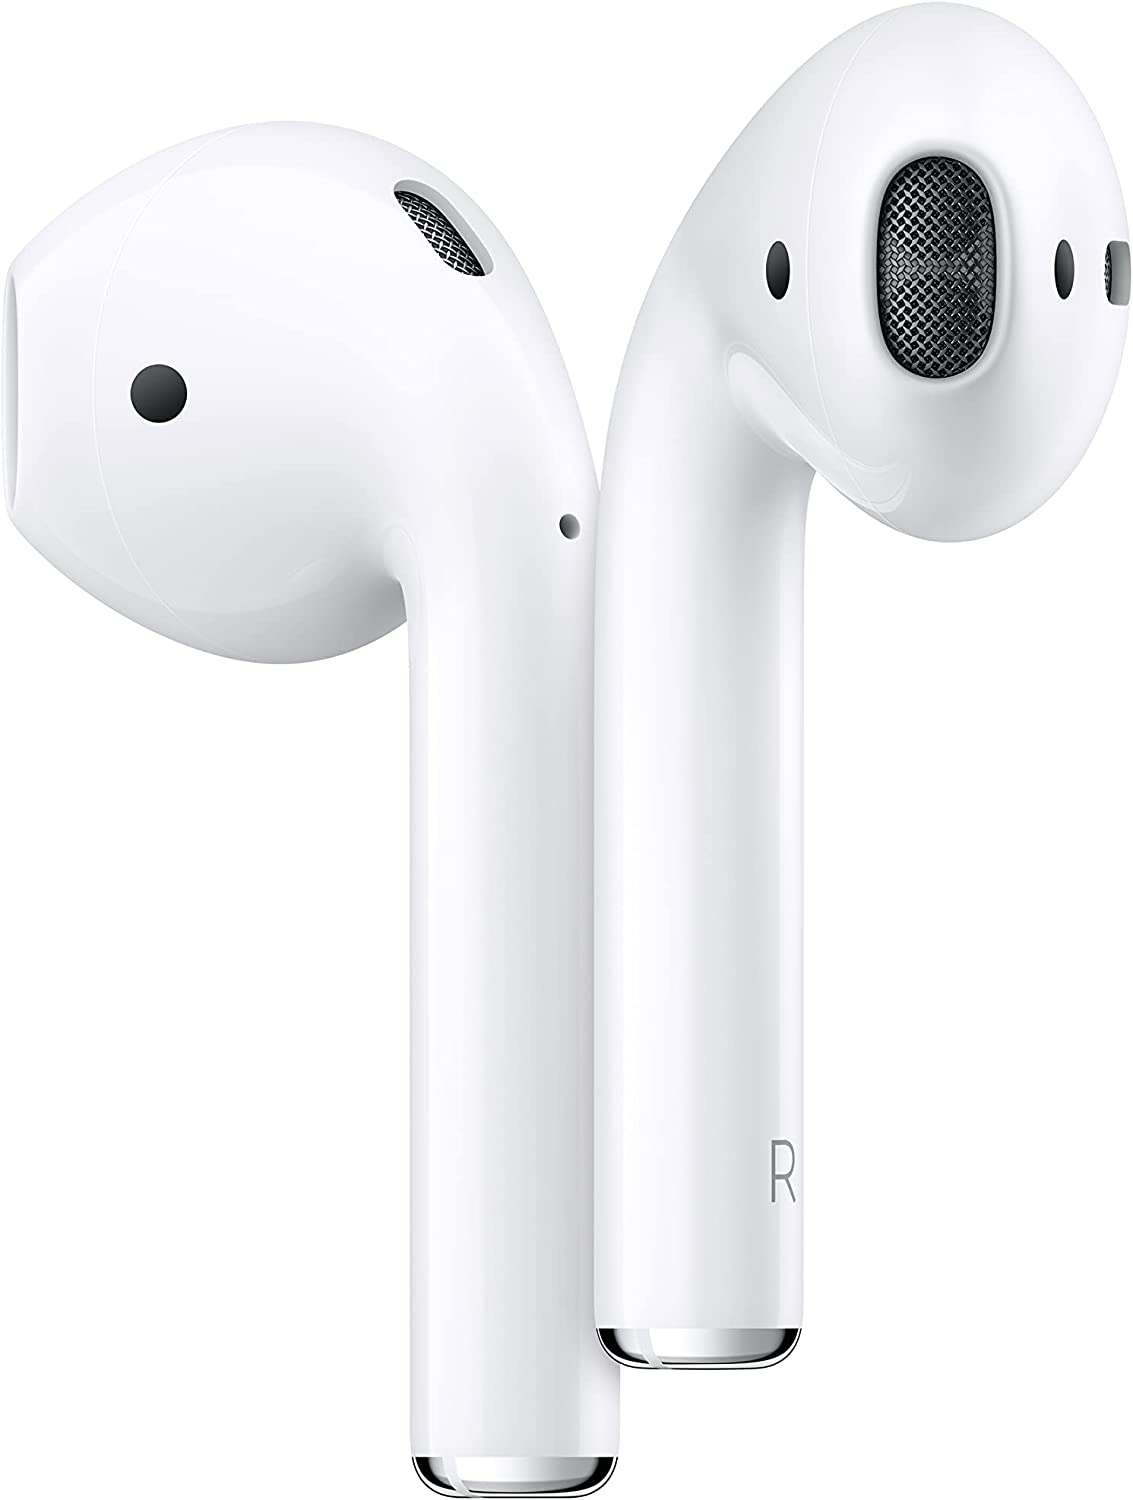 Apple AirPods Pro: Premium Wireless Earbuds with Active Noise Cancellation🌟 Your Ultimate Destination for the World's Best Offers 🌍 Don't Miss Out!